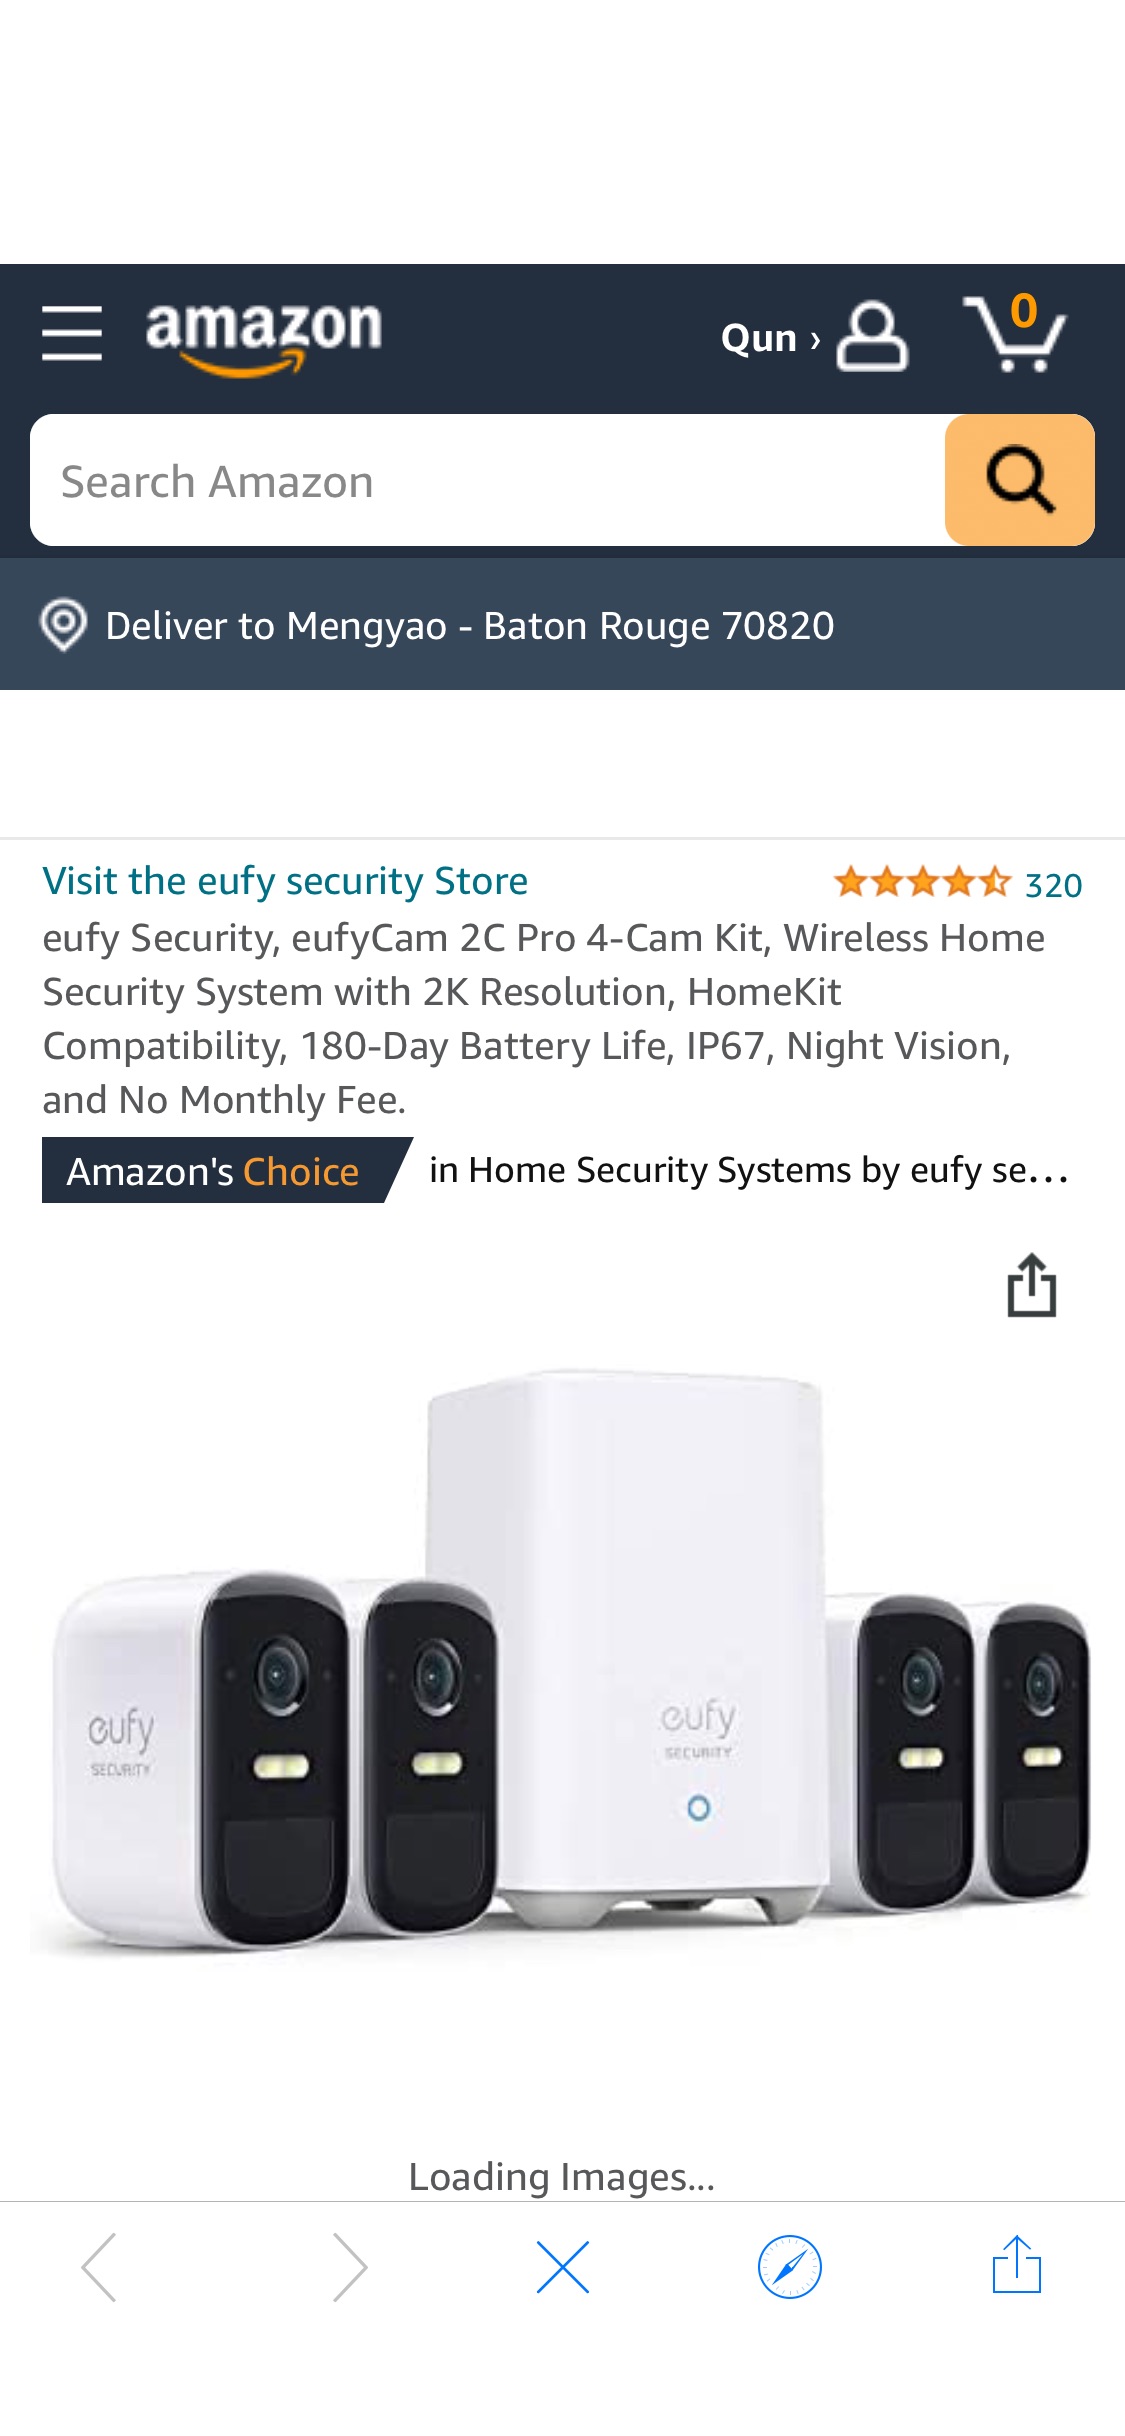 Amazon.com : eufy Security, eufyCam 2C Pro 4-Cam Kit, Wireless Home Security System with 2K Resolution, HomeKit Compatibility, 180-Day Battery Life, IP67, Night Vision, and No Monthly F 套装